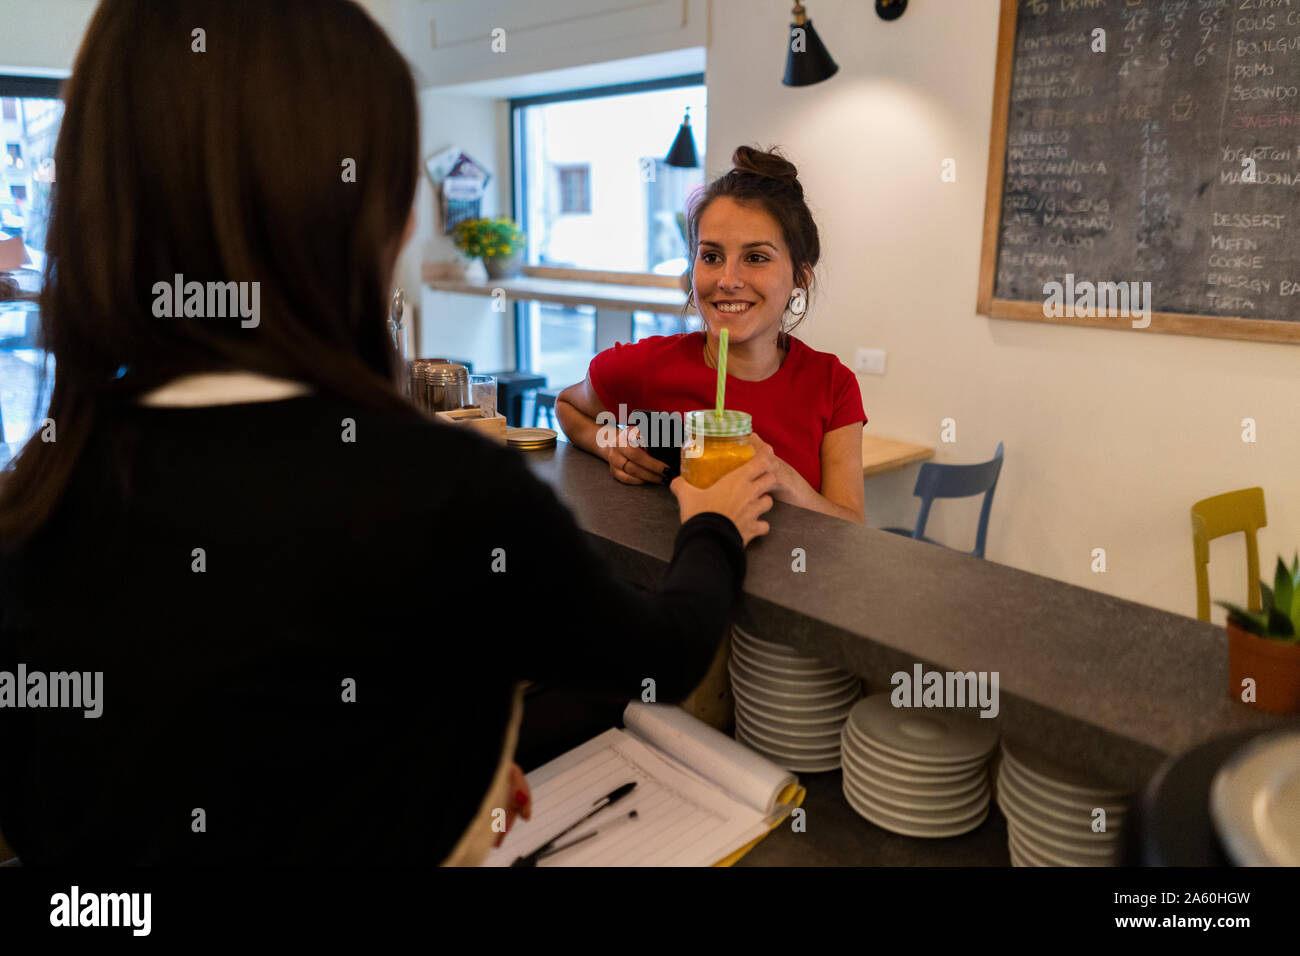 Smiling young woman at the counter in a cafe Stock Photo